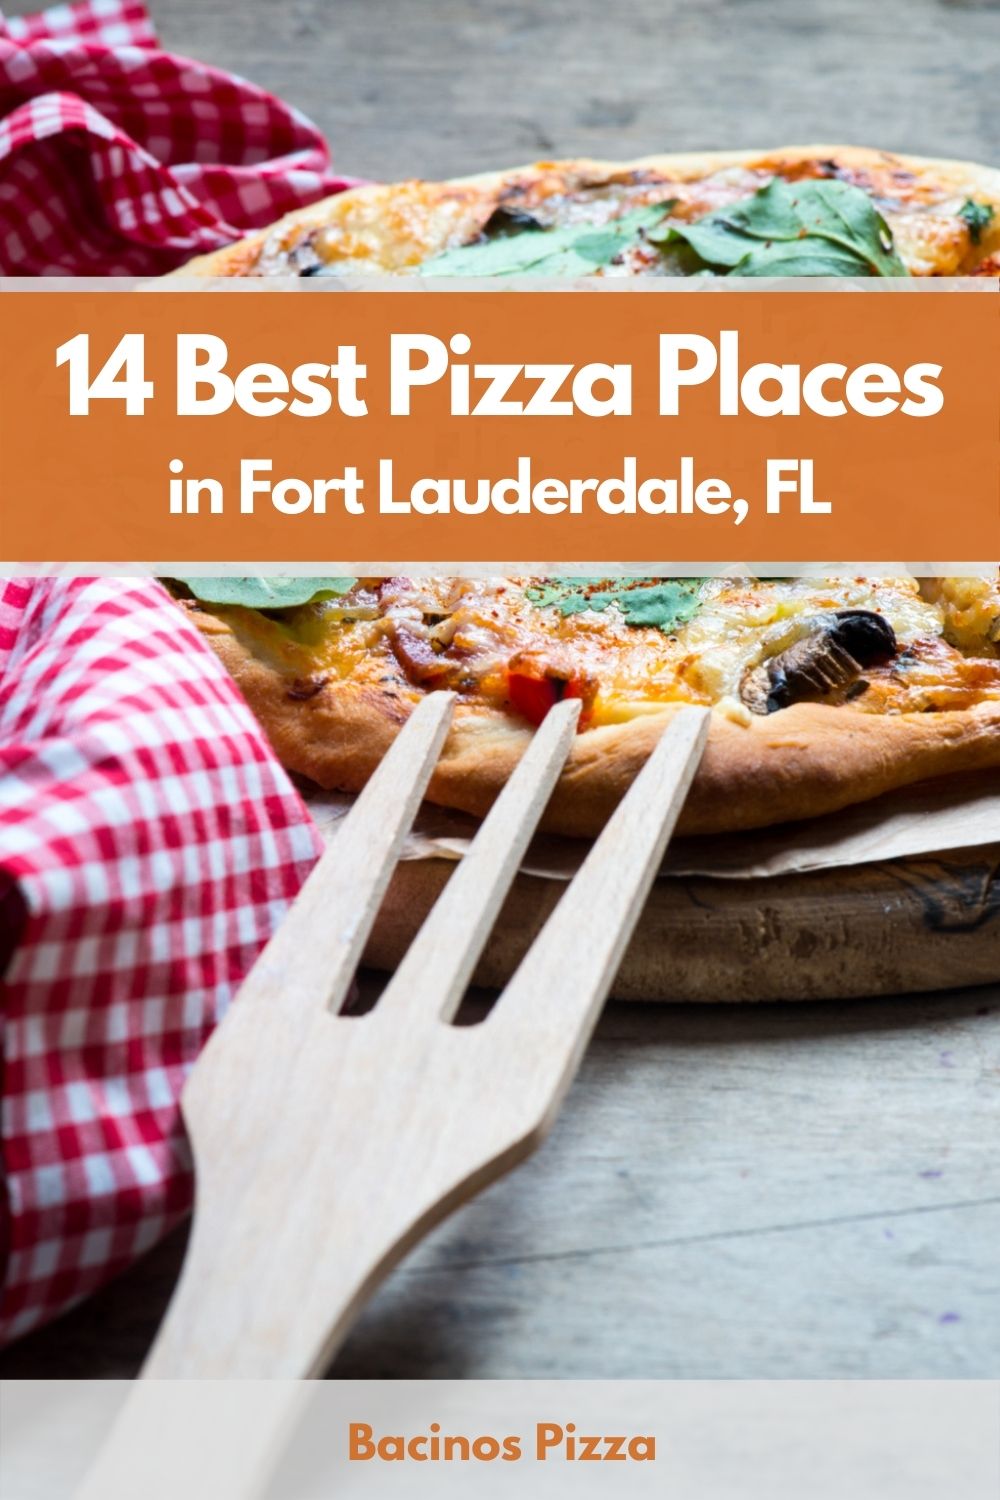 14 Best Pizza Places in Fort Lauderdale, FL pin 2